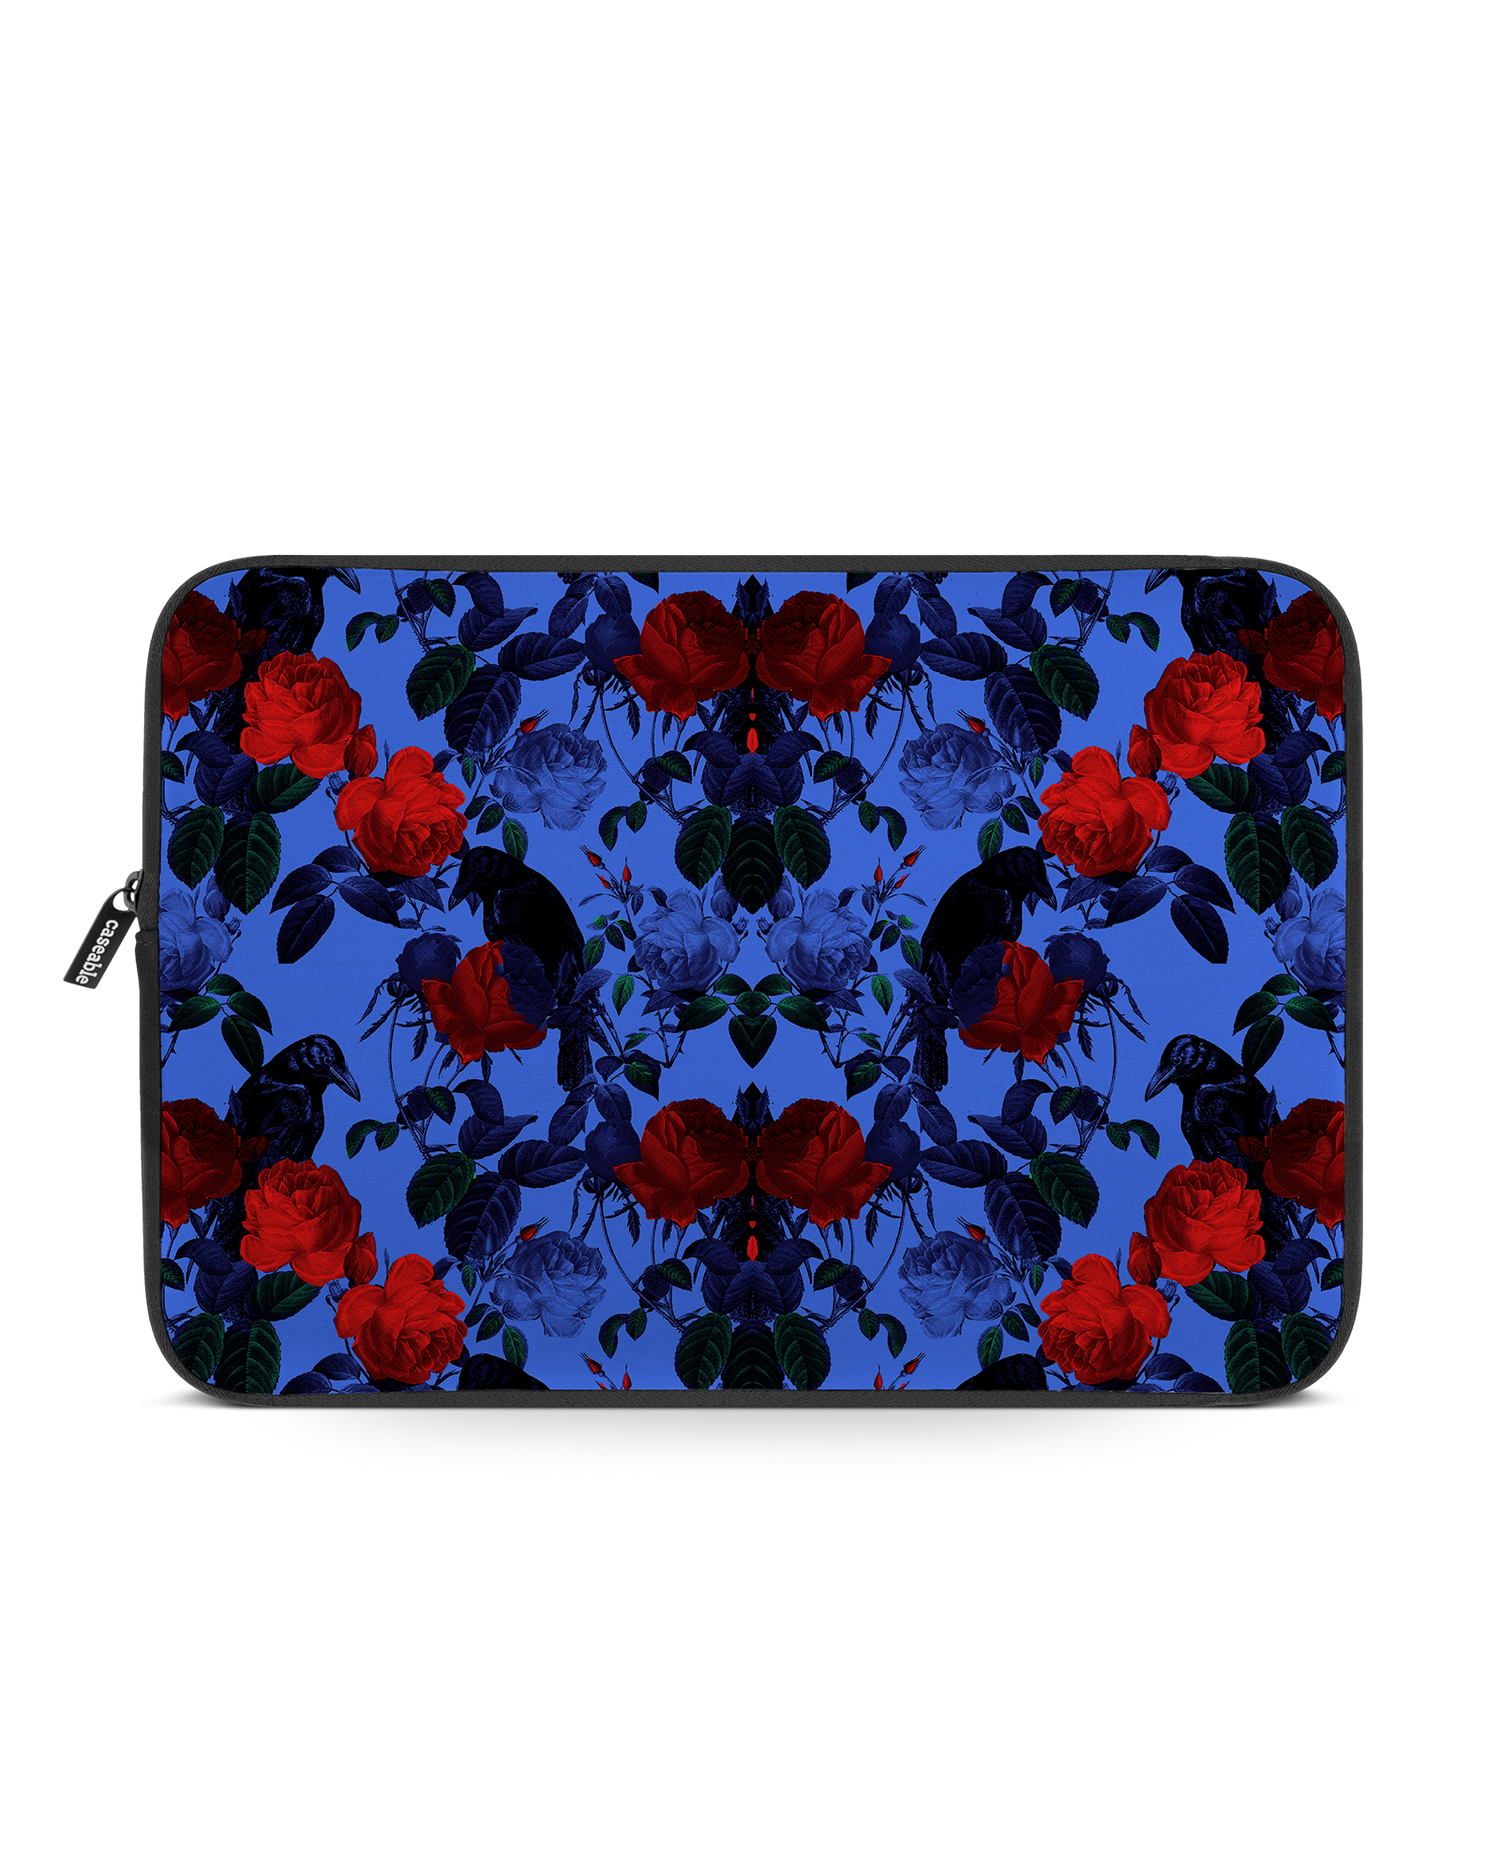 Roses And Ravens Laptop Case 14 inch: Front View